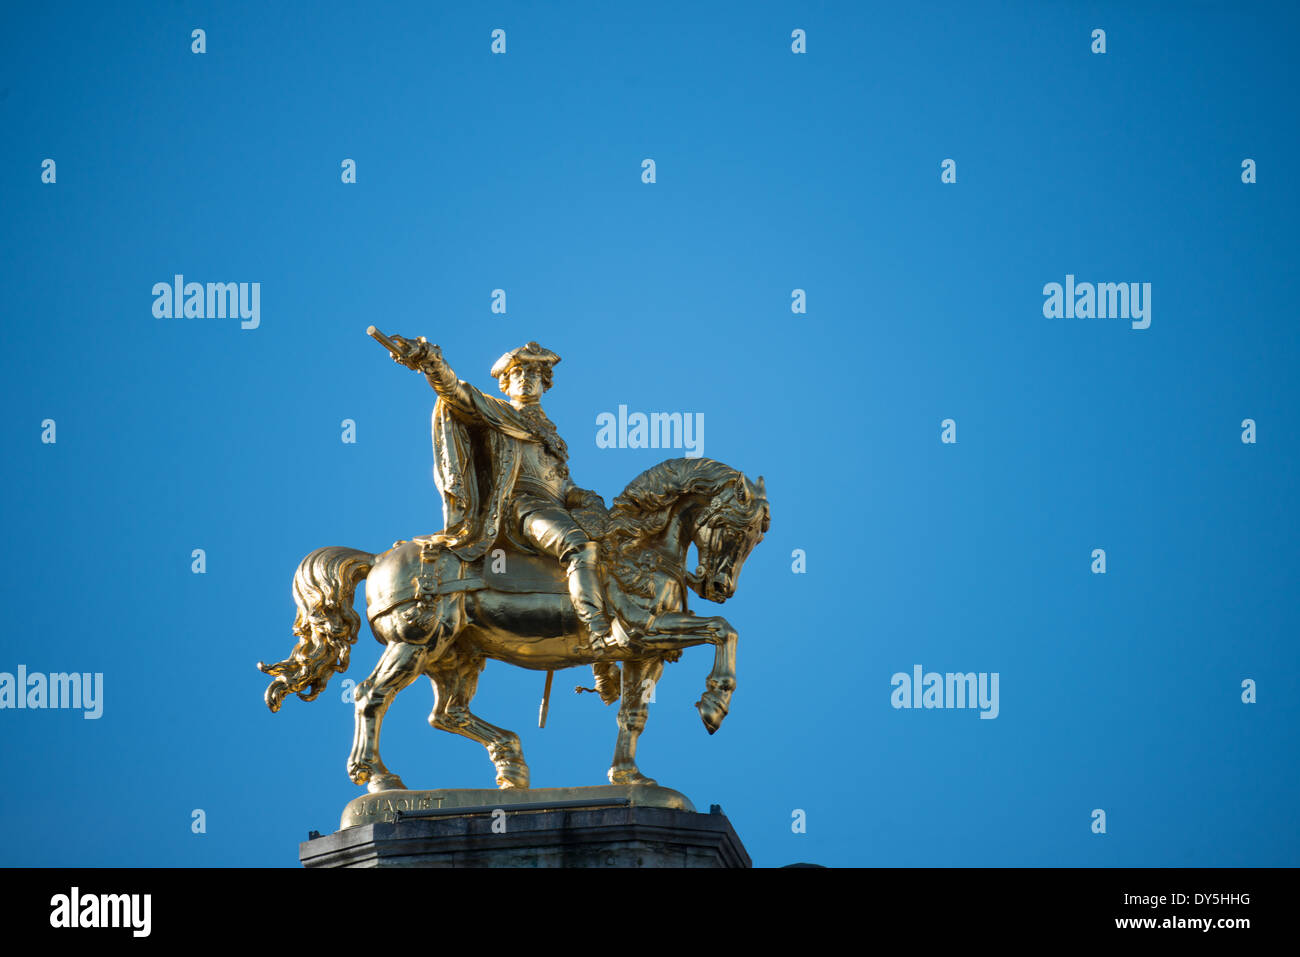 A gold equestrian statue sits astride one of the ornate buildings on Grand Place (La Grand-Place), a UNESCO World Heritage Site in central Brussels, Belgium. Lined with ornate, historic buildings, the cobblestone square is the primary tourist attraction in Brussels. Stock Photo